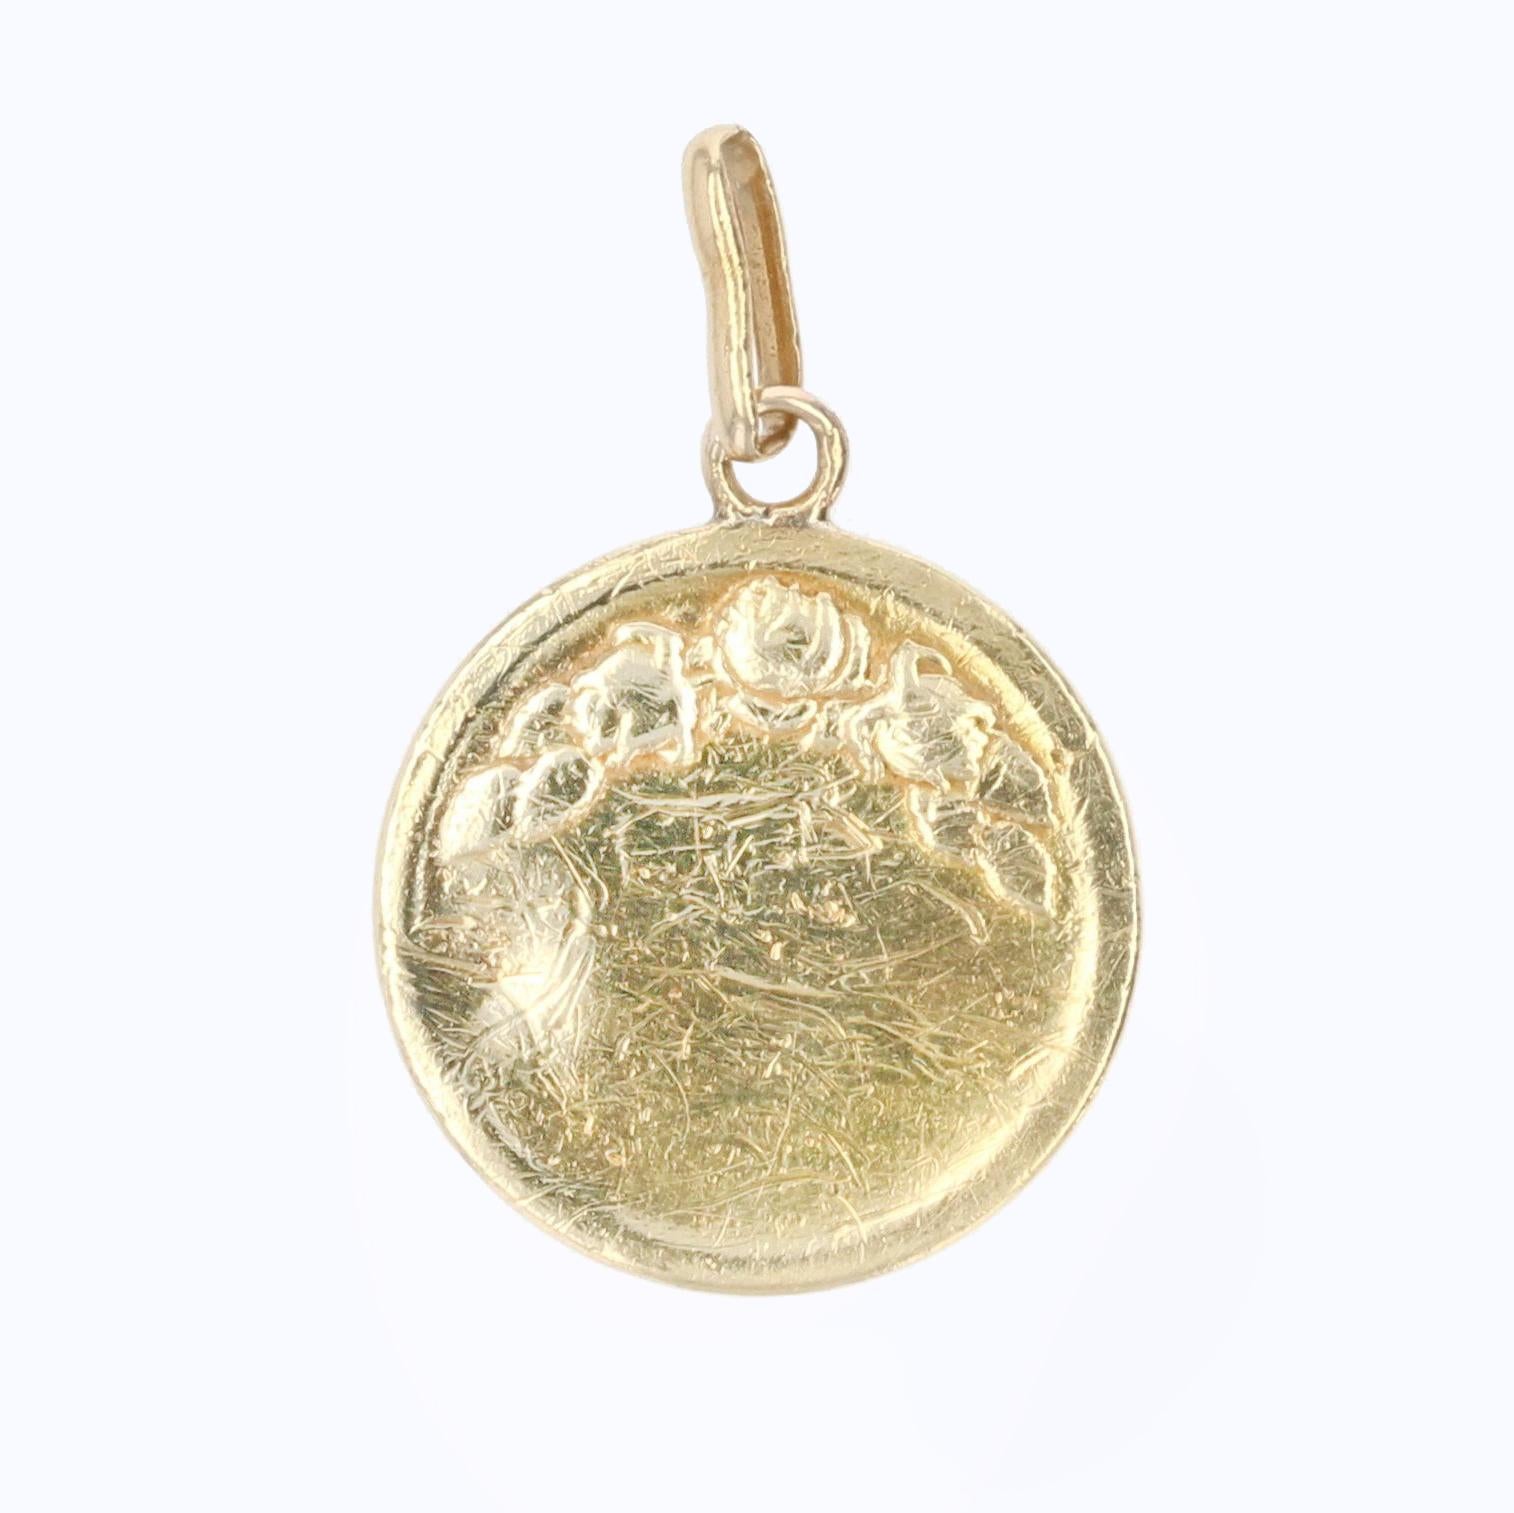 Medal in 18 karat yellow gold.
Antique medal of round shape, it represents the Virgin haloed. The back of this antique jewel is decorated with floral pattern.
Religious pendant signed E. Dropsy.
Height : 2,3 cm, width at the widest : 1,5 cm,